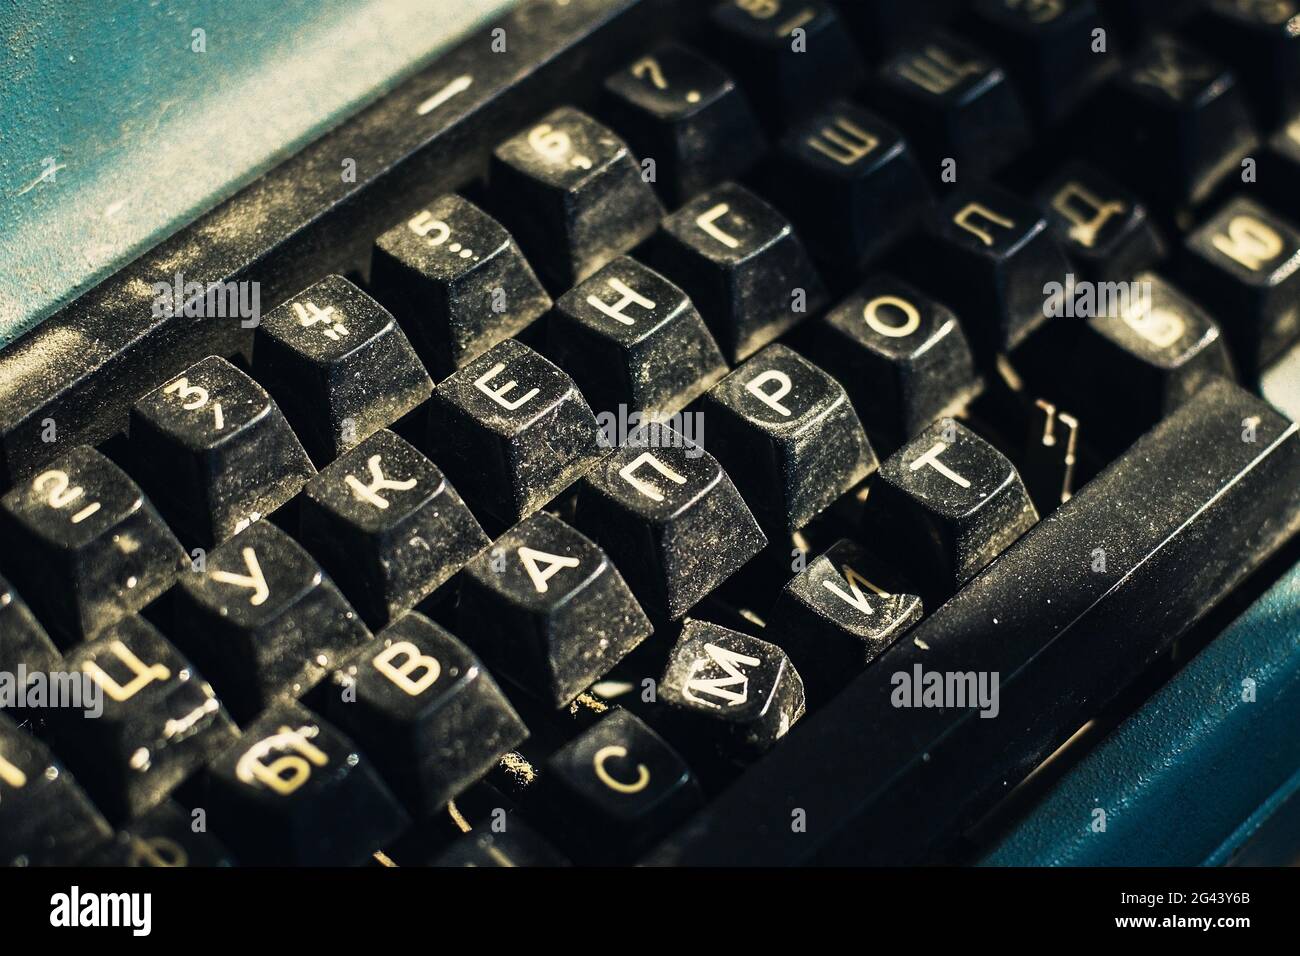 An old typewriter with the Russian alphabet. Close-up Stock Photo